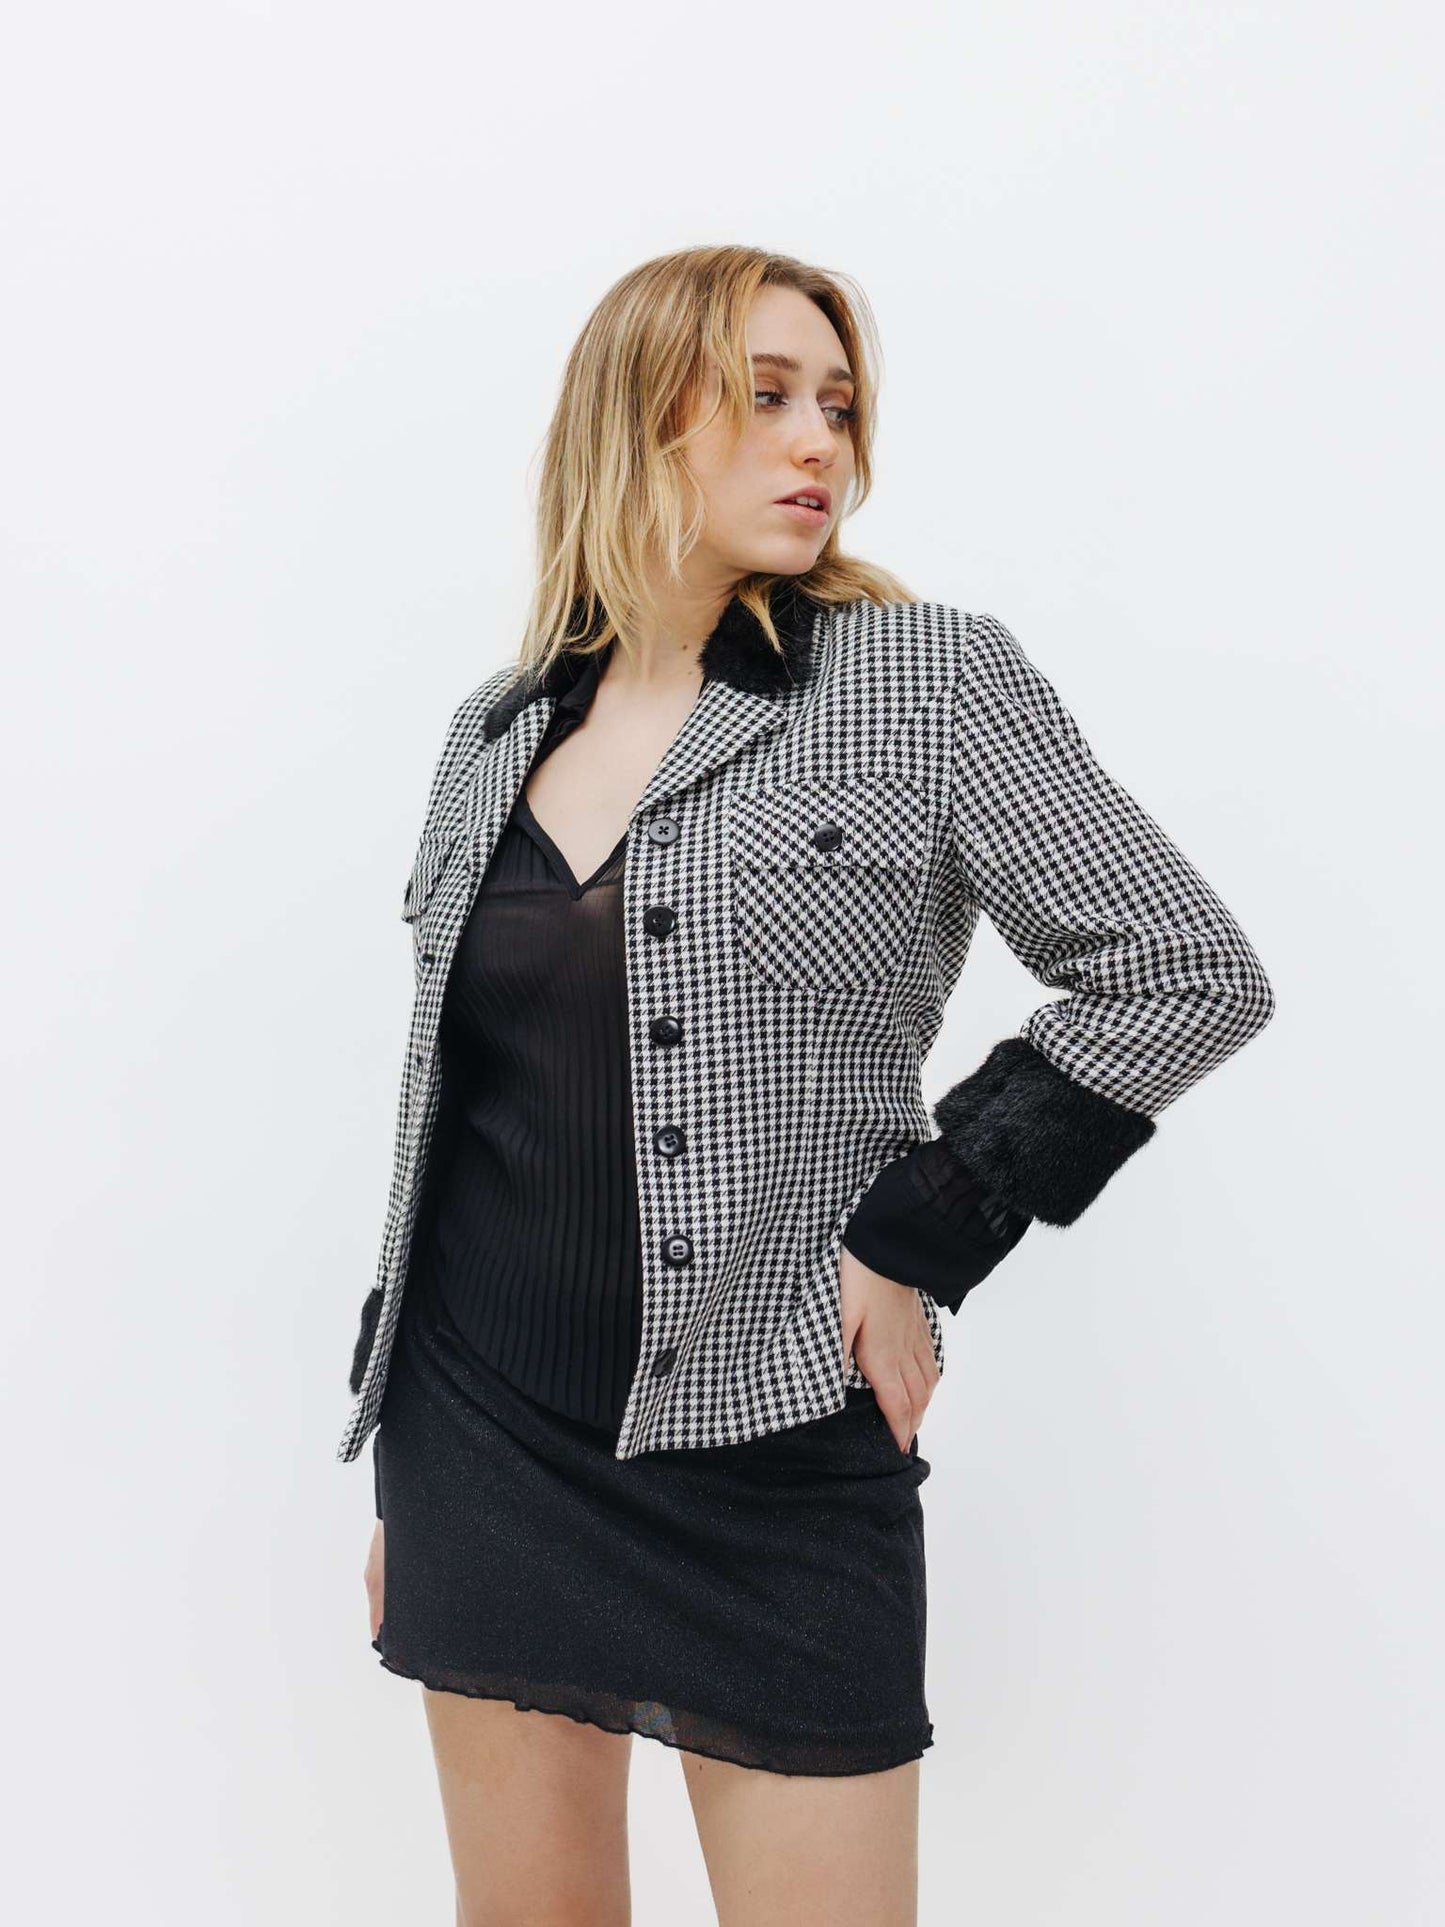 Vintage 90s Mob Wife Houndstooth Blazer (it's giving Chanel)